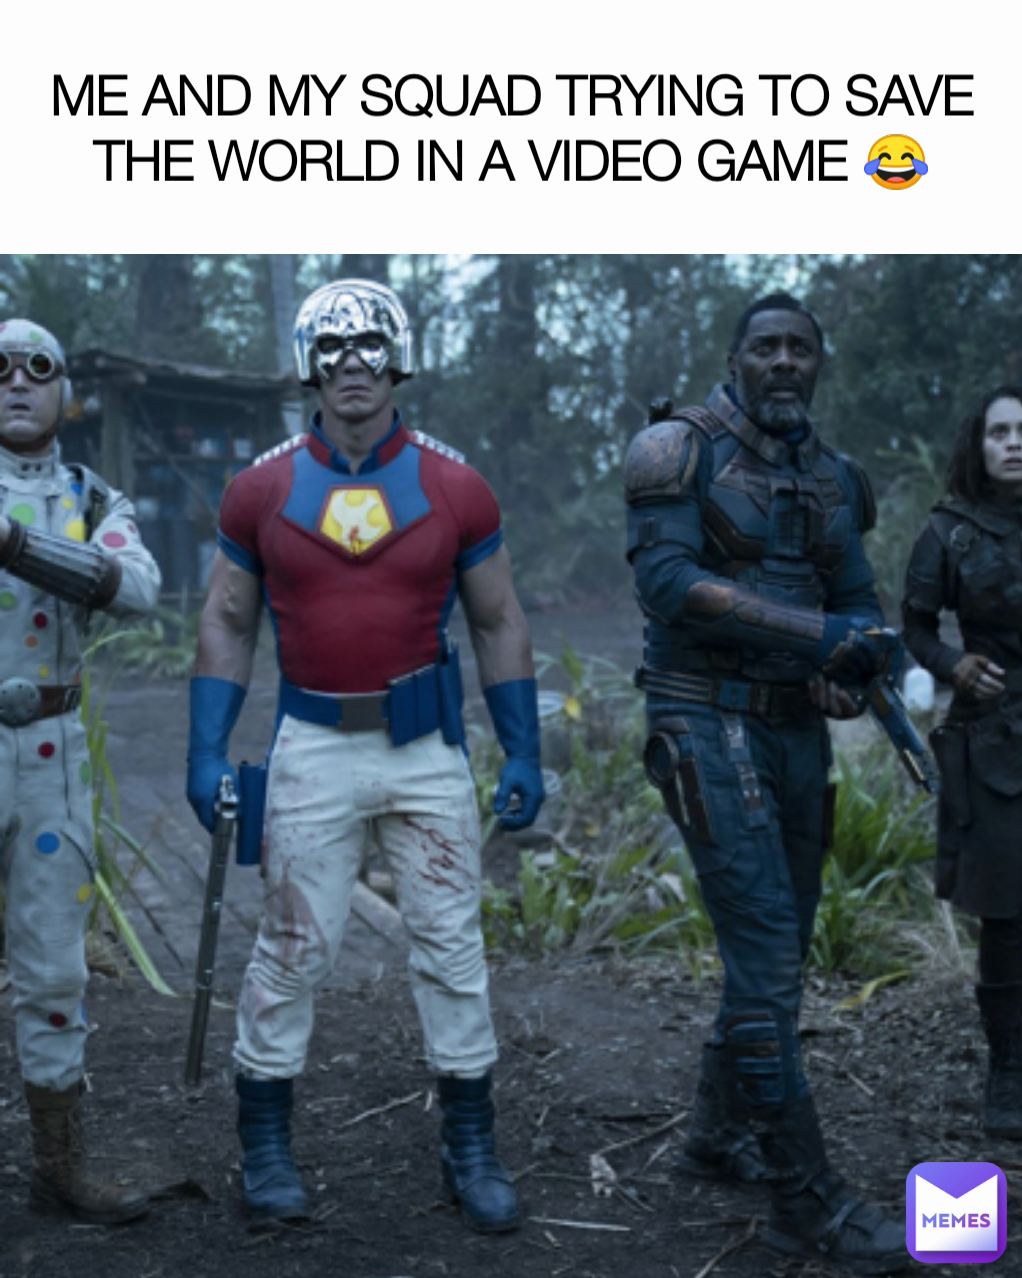 ME AND MY SQUAD TRYING TO SAVE THE WORLD IN A VIDEO GAME 😂